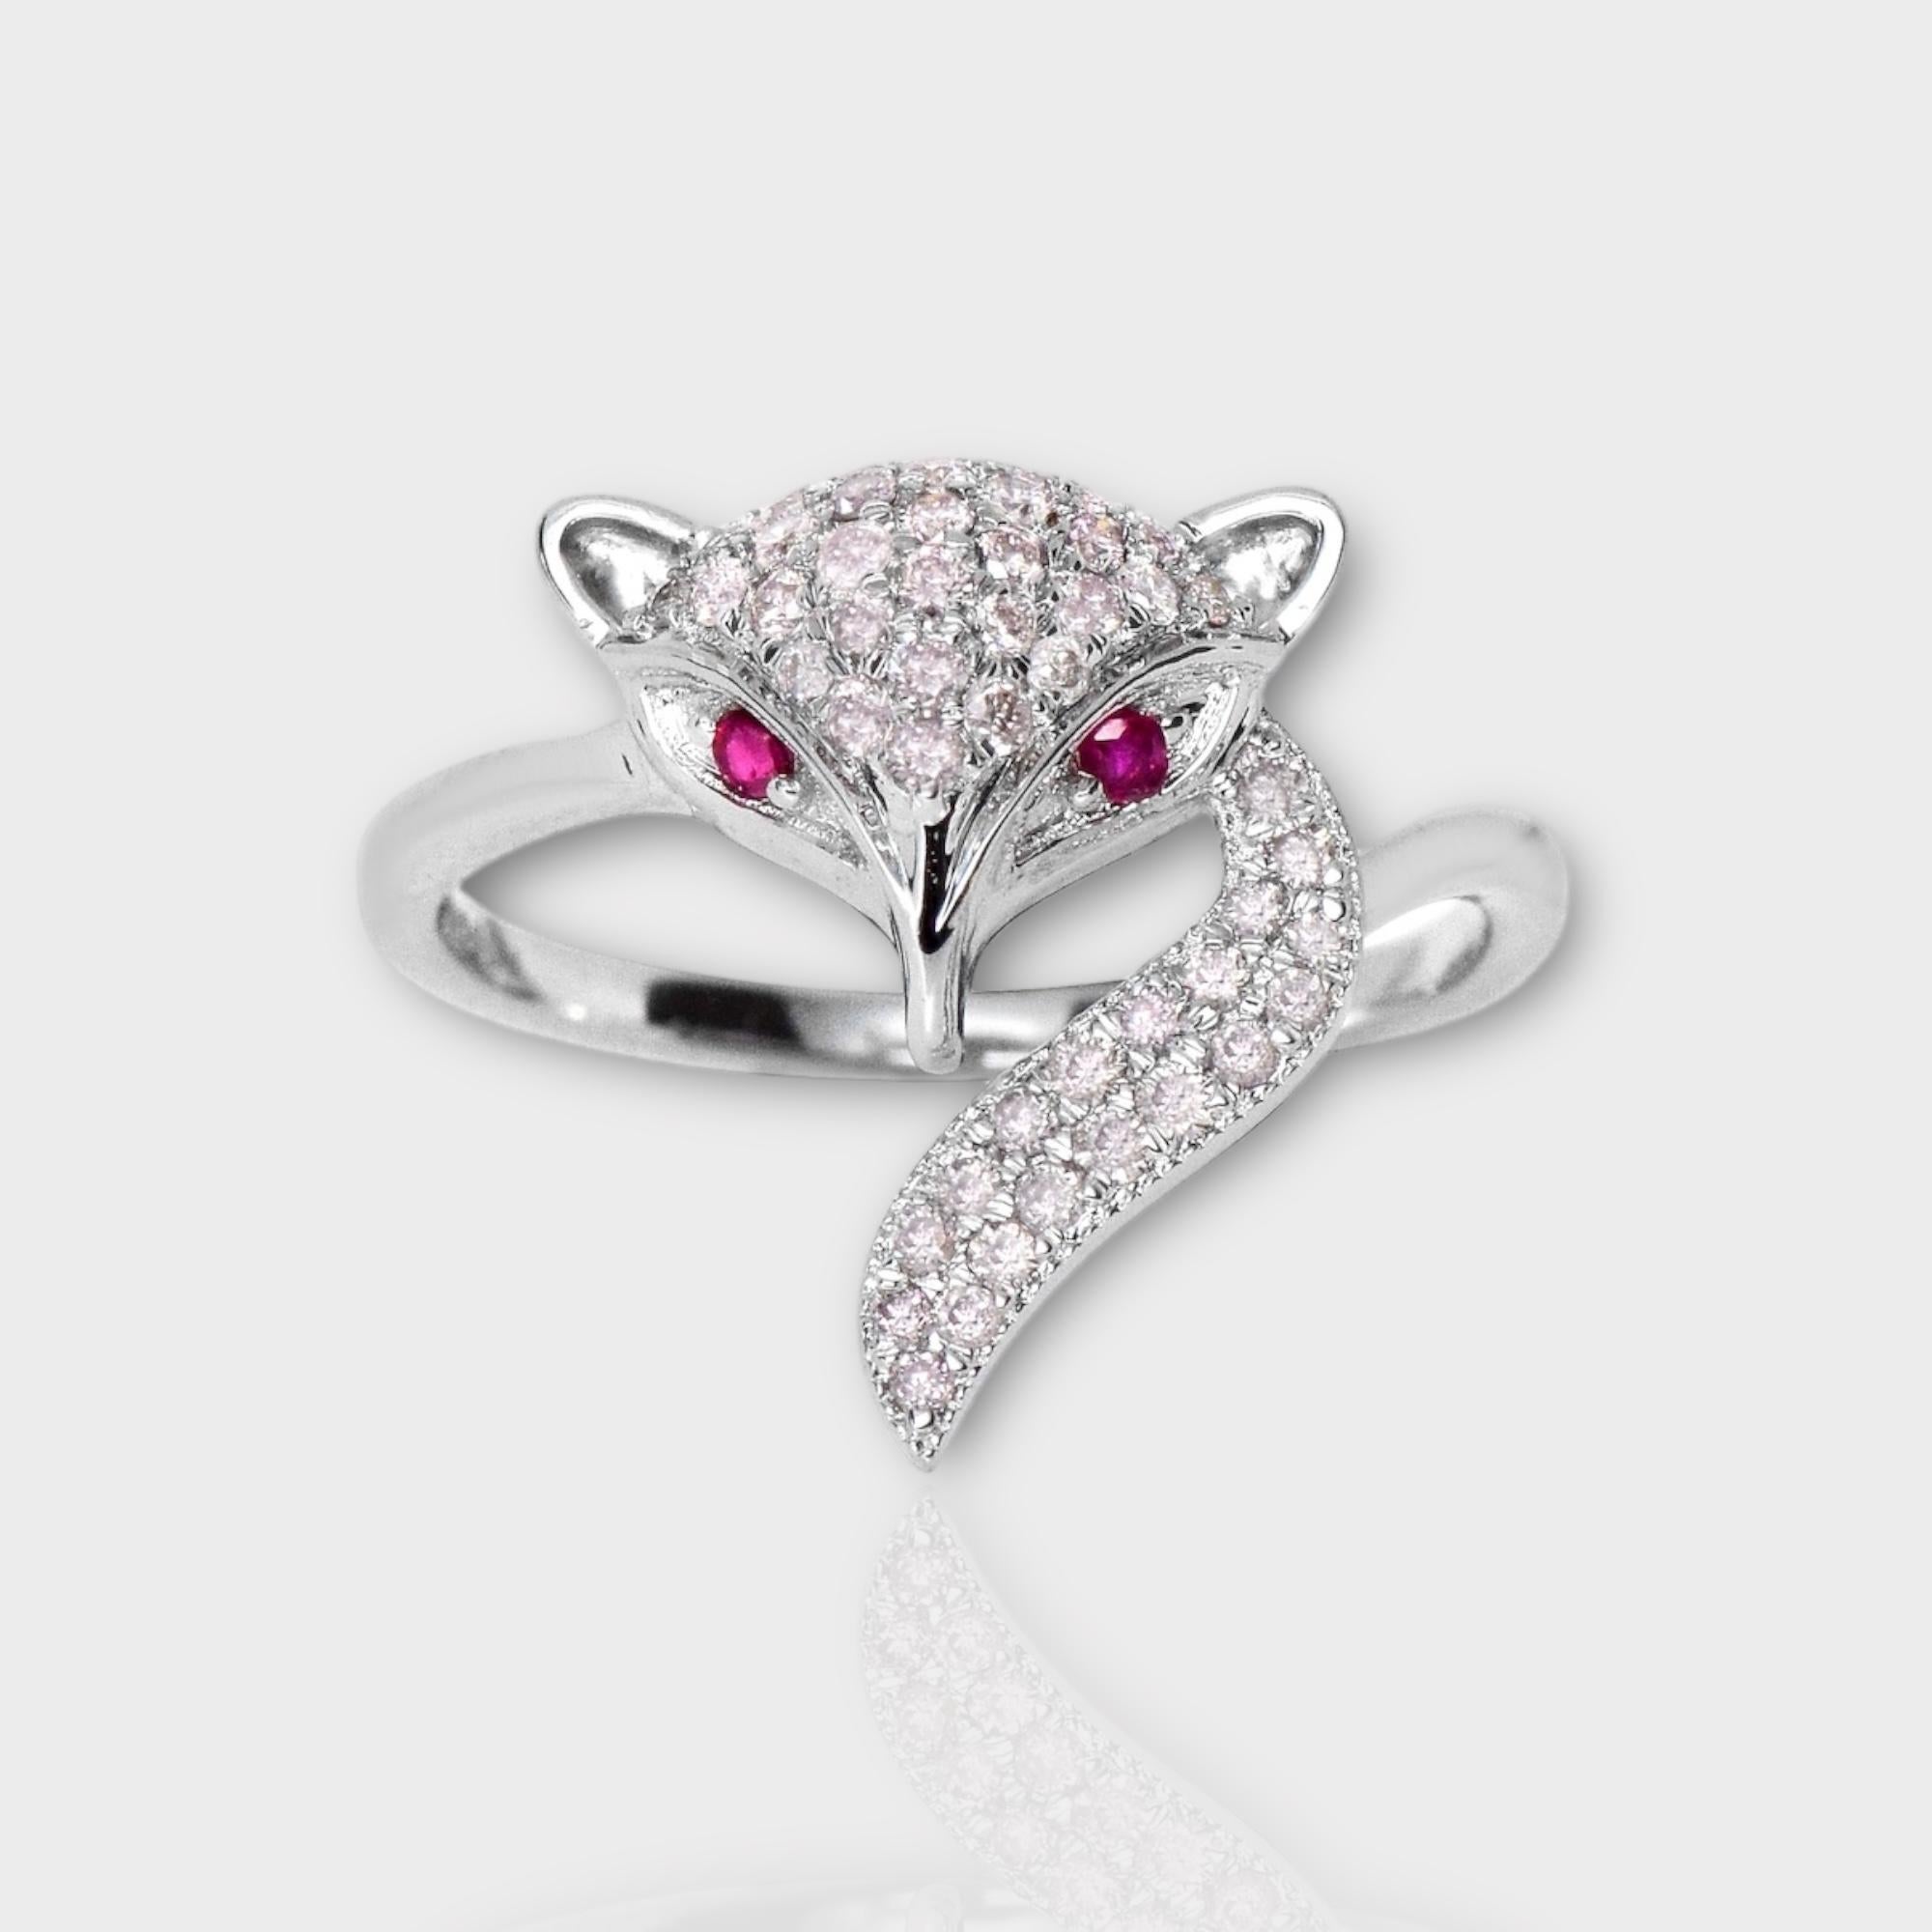 *IGI 14K 0.32 ct Natural Pink Diamonds Fox Design  Antique Art Deco Ring*

This band features a stunning design with a fox crafted from 14K white gold. It is set with natural pink diamonds weighing 0.32 carats.

This ring features colorful natural